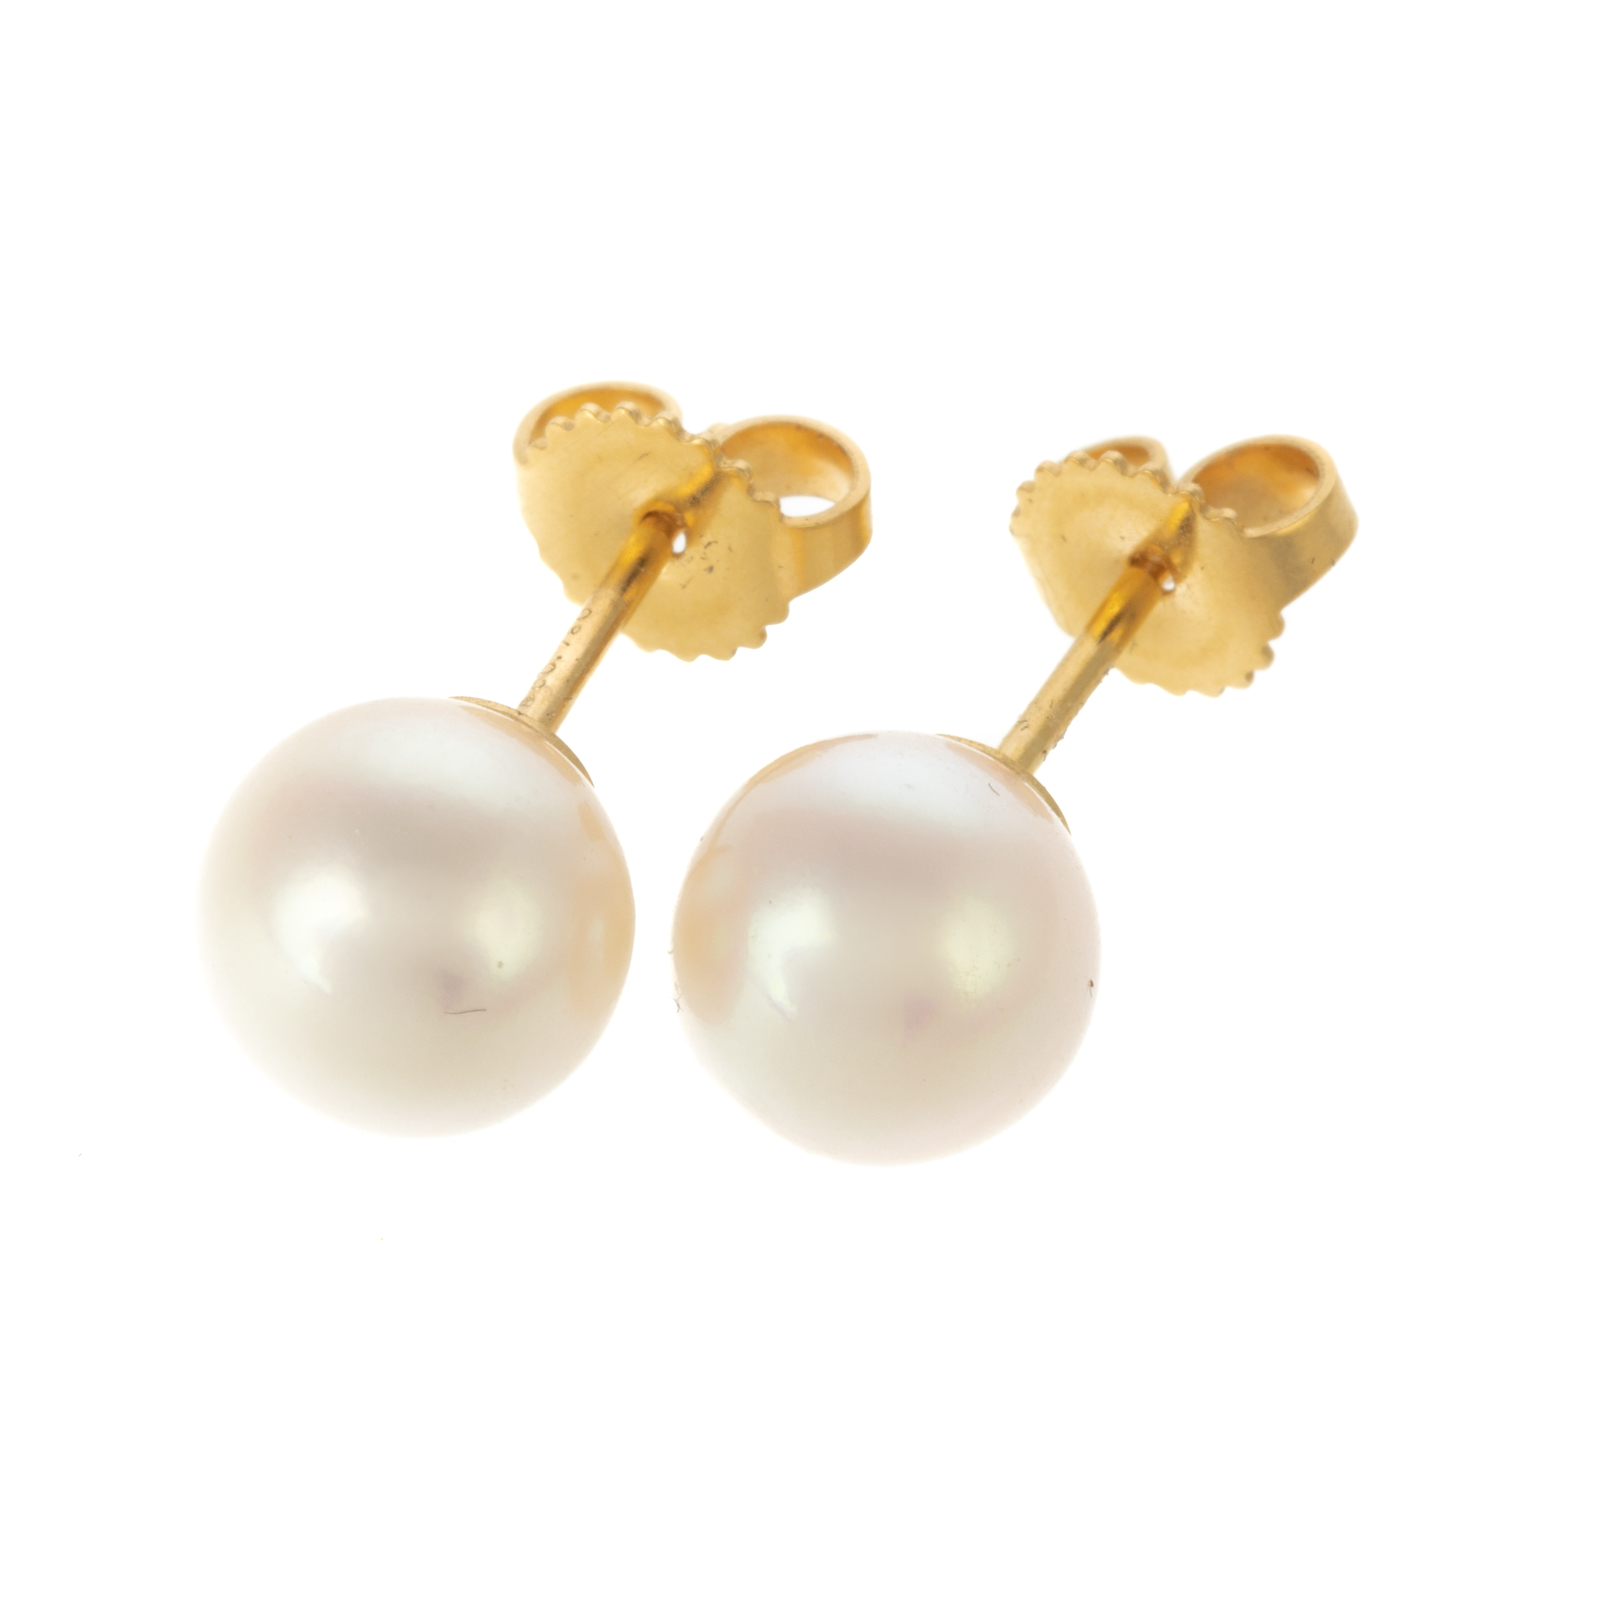 A PAIR OF TIFFANY CO 8MM PEARL 33868a